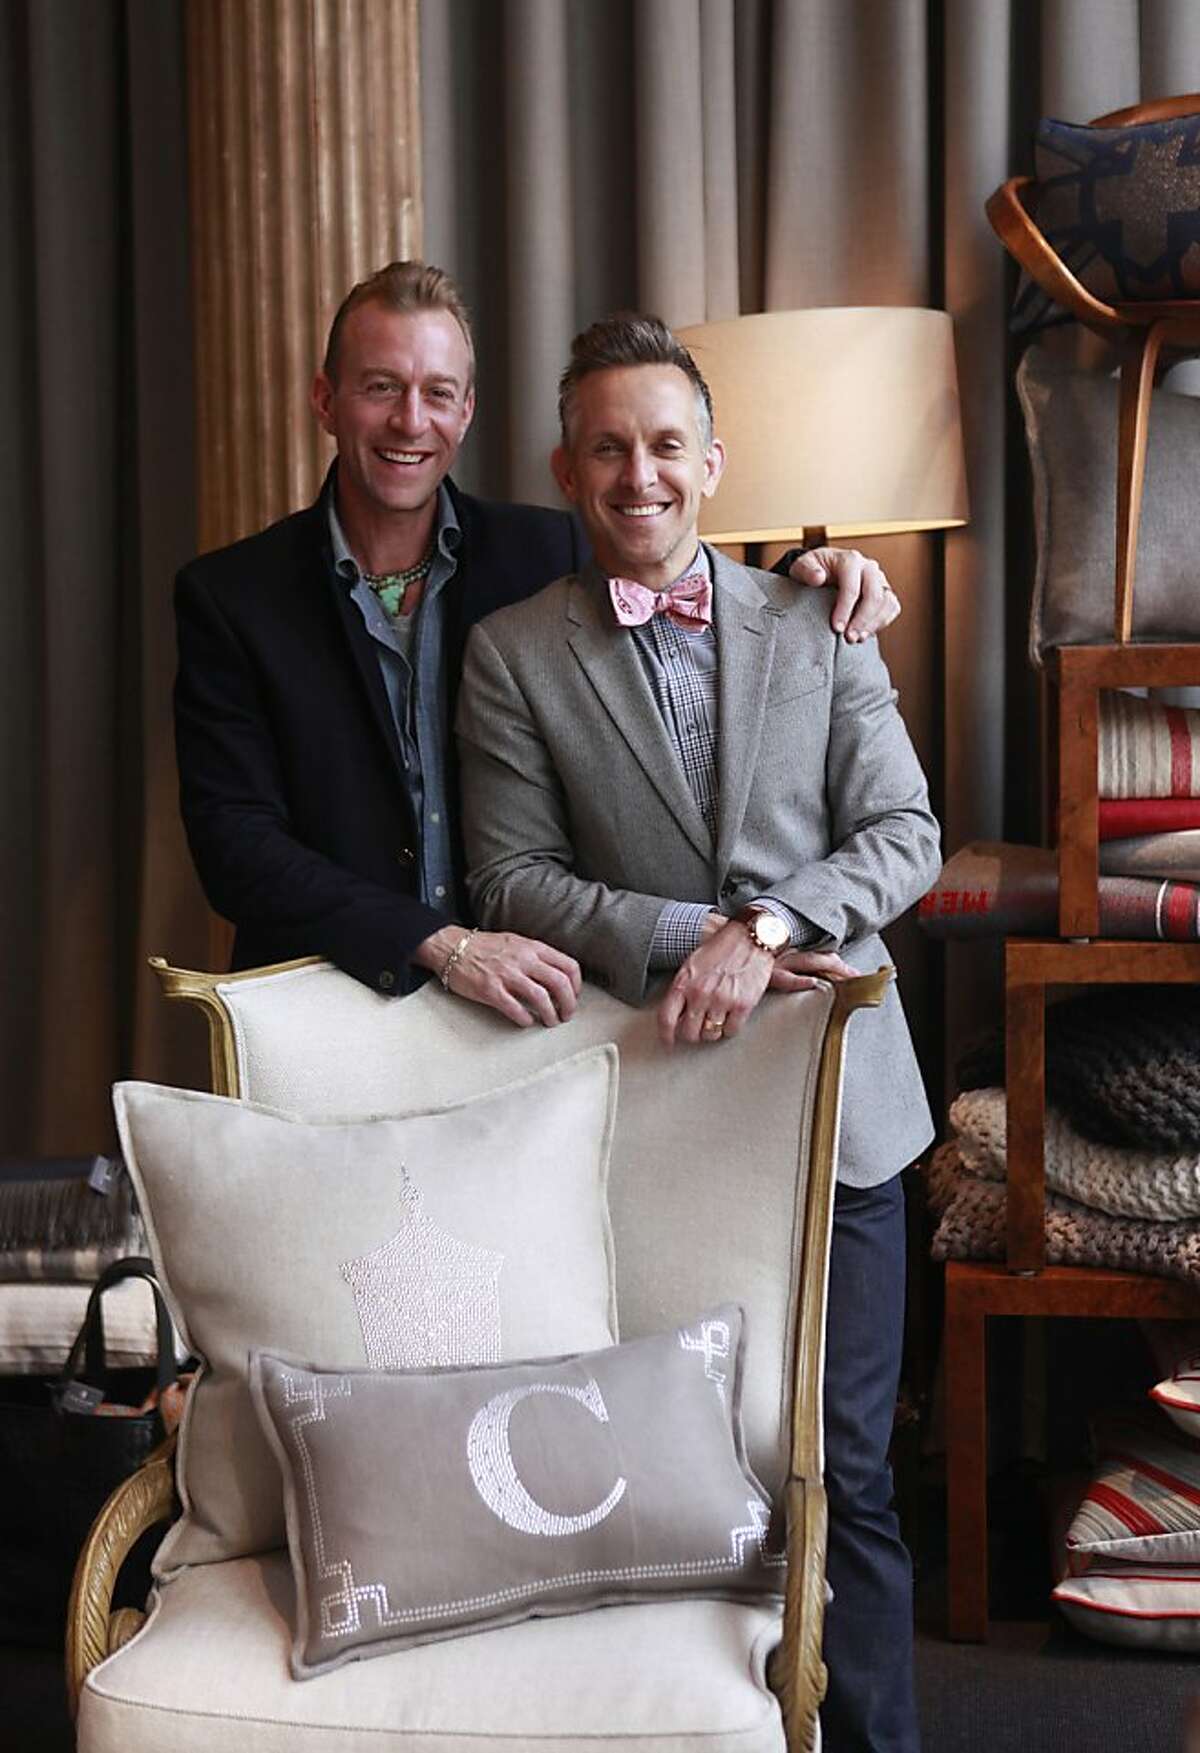 Michael Purdy and Jay Jeffers inside of the new home furnishing store Cavalier, in San Francisco, California onTuesday, April 17, 2012.